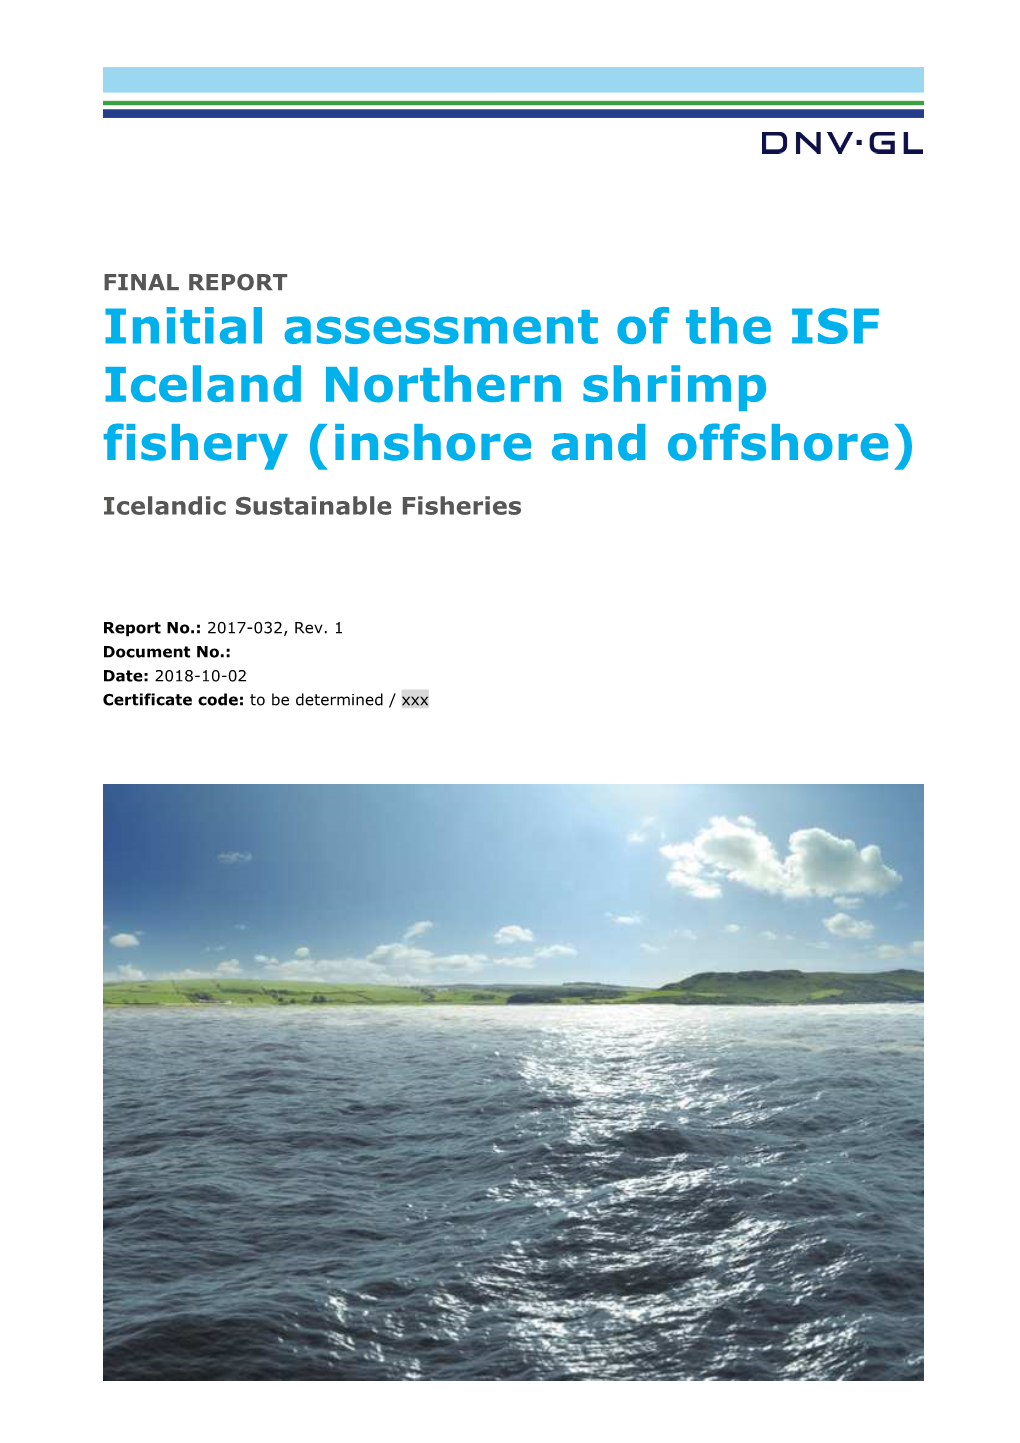 Initial Assessment of the ISF Iceland Northern Shrimp Fishery (Inshore and Offshore)